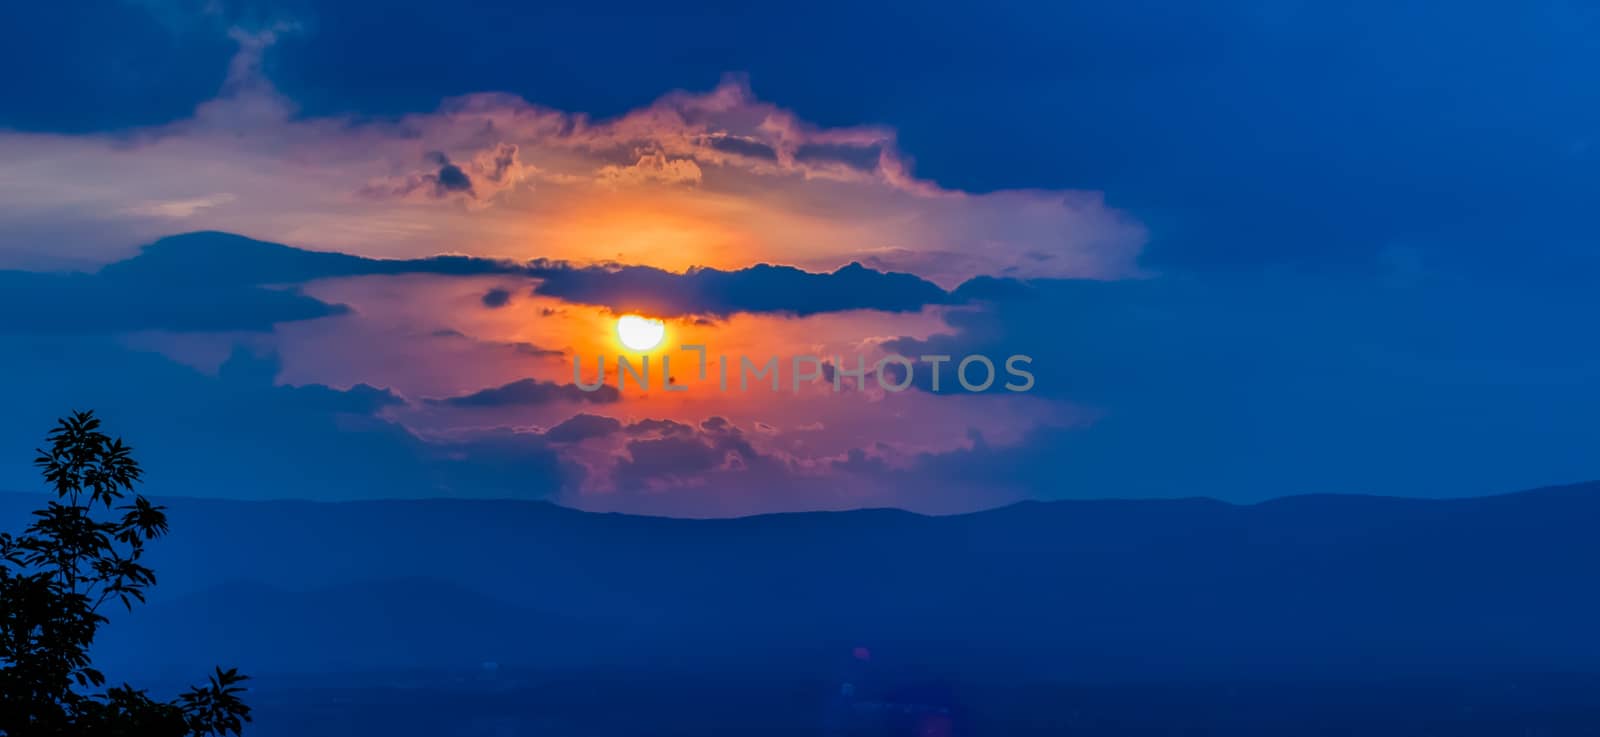 orange sunset sky and clouds over mountain valley by digidreamgrafix